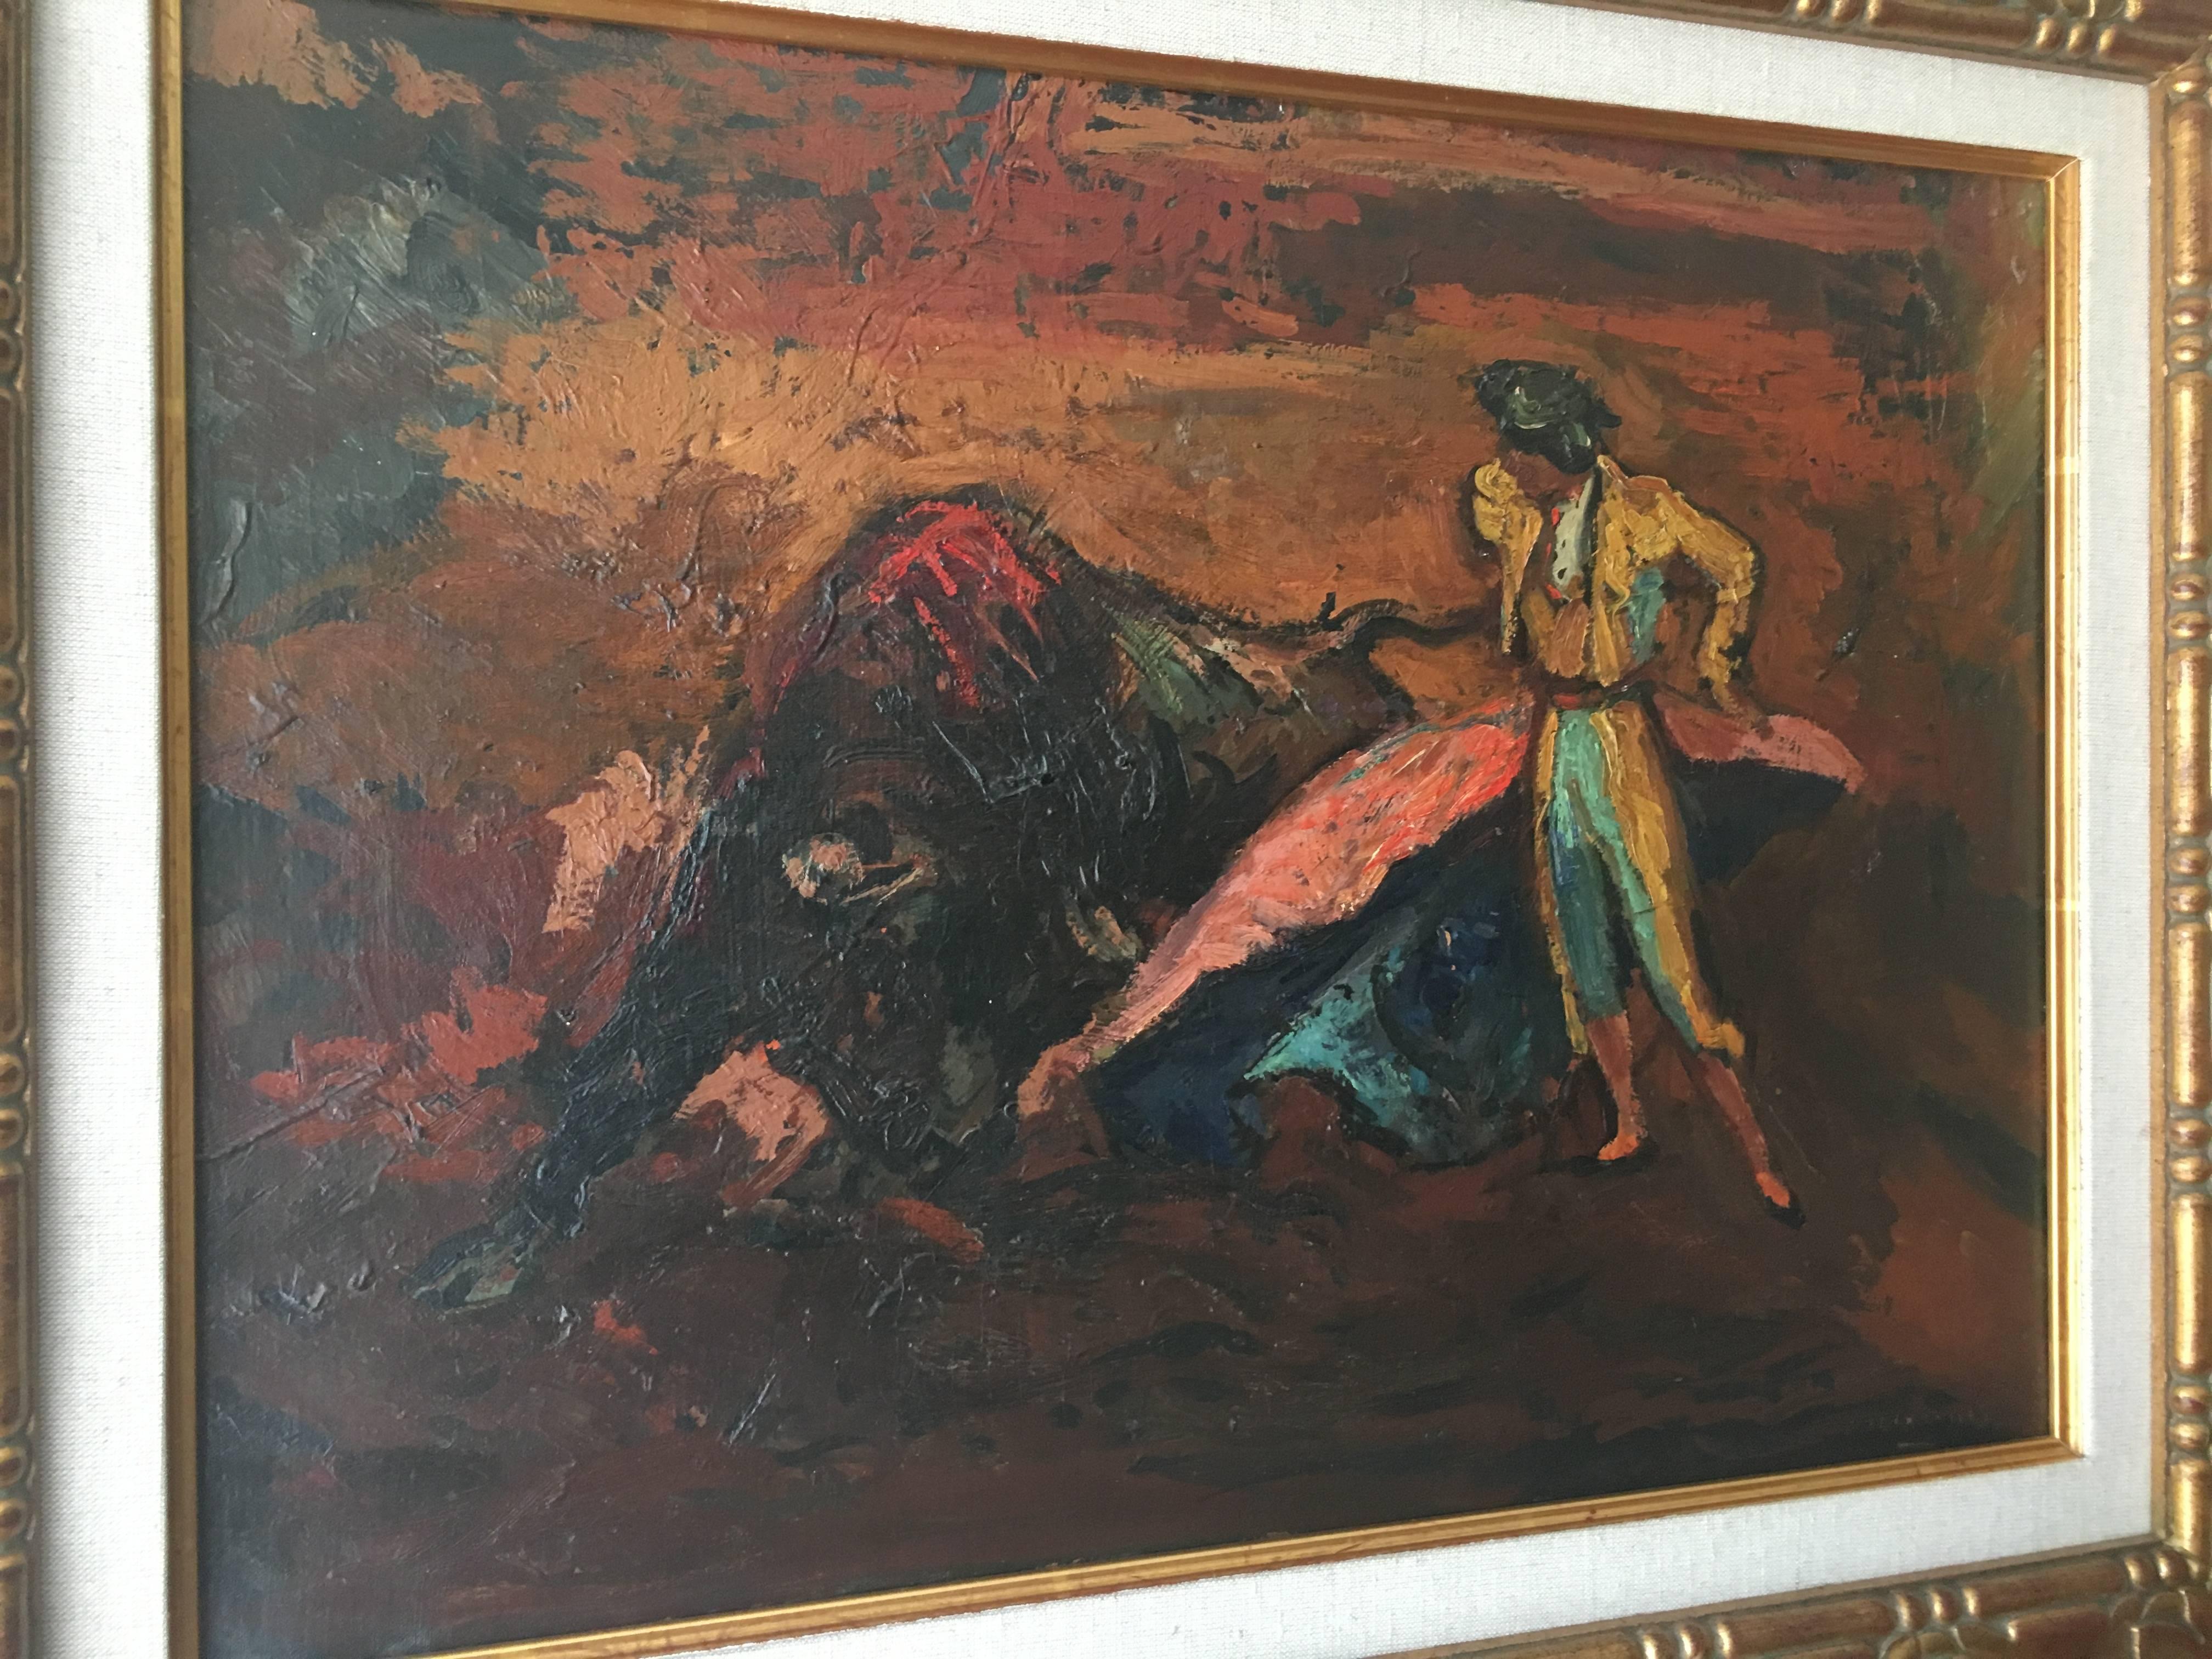 Pere Créixams Picó Figurative Painting - Creixams  14 Bullfighter and Bull original impressionist acrylic canvas painting